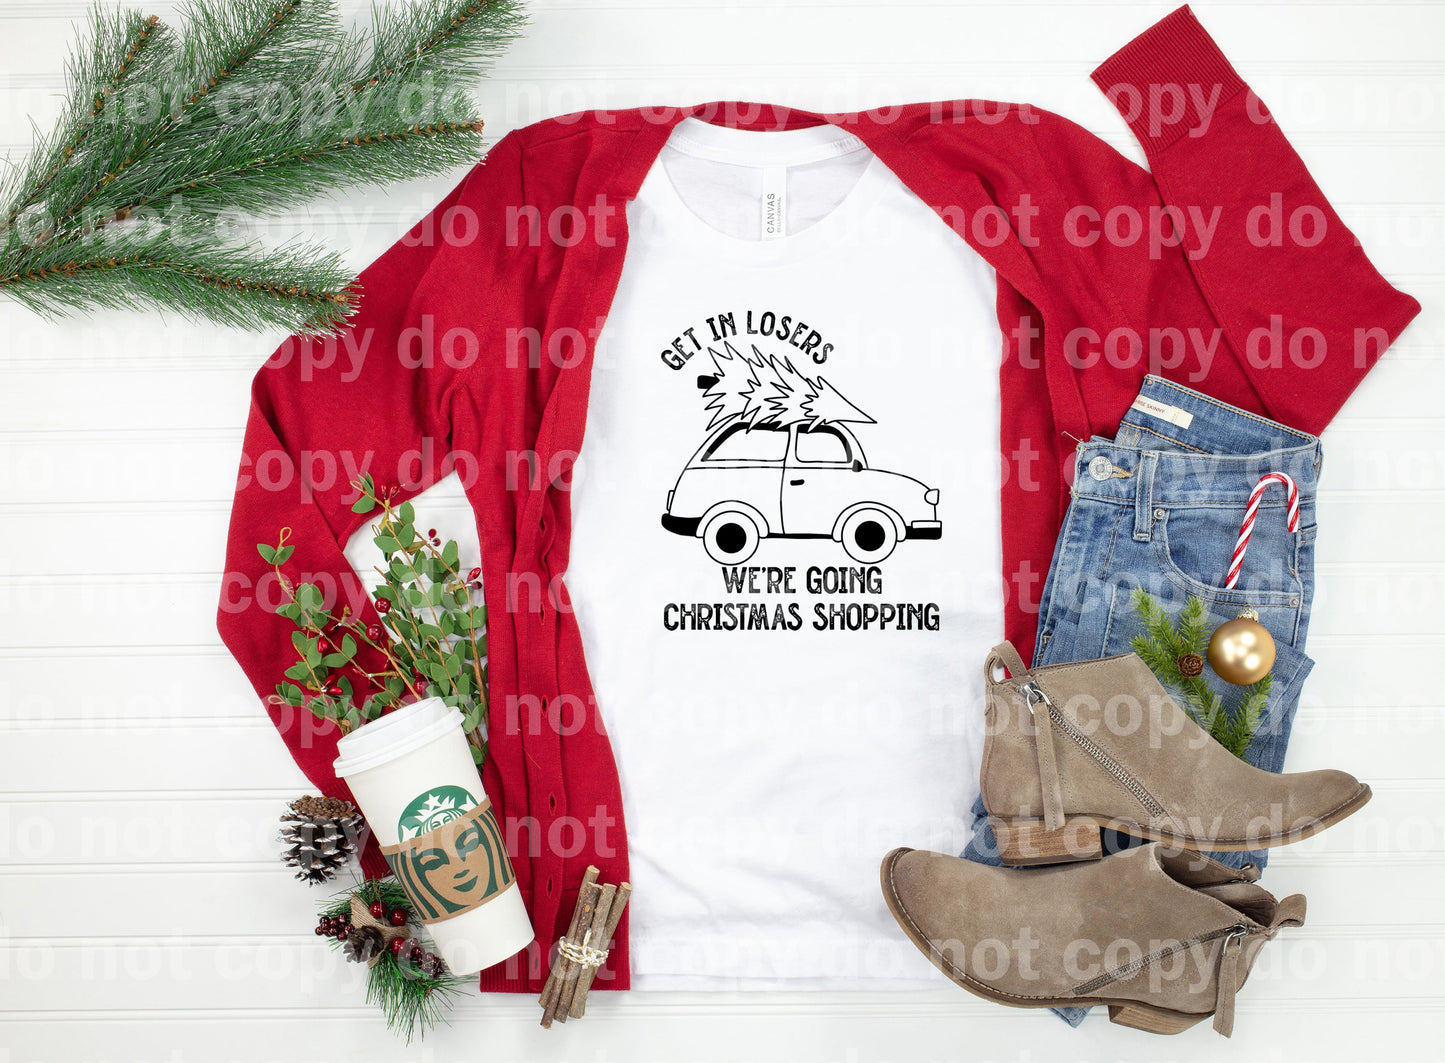 Get In Losers We're Going Christmas Shopping Full Color/One Color Dream Print or Sublimation Print